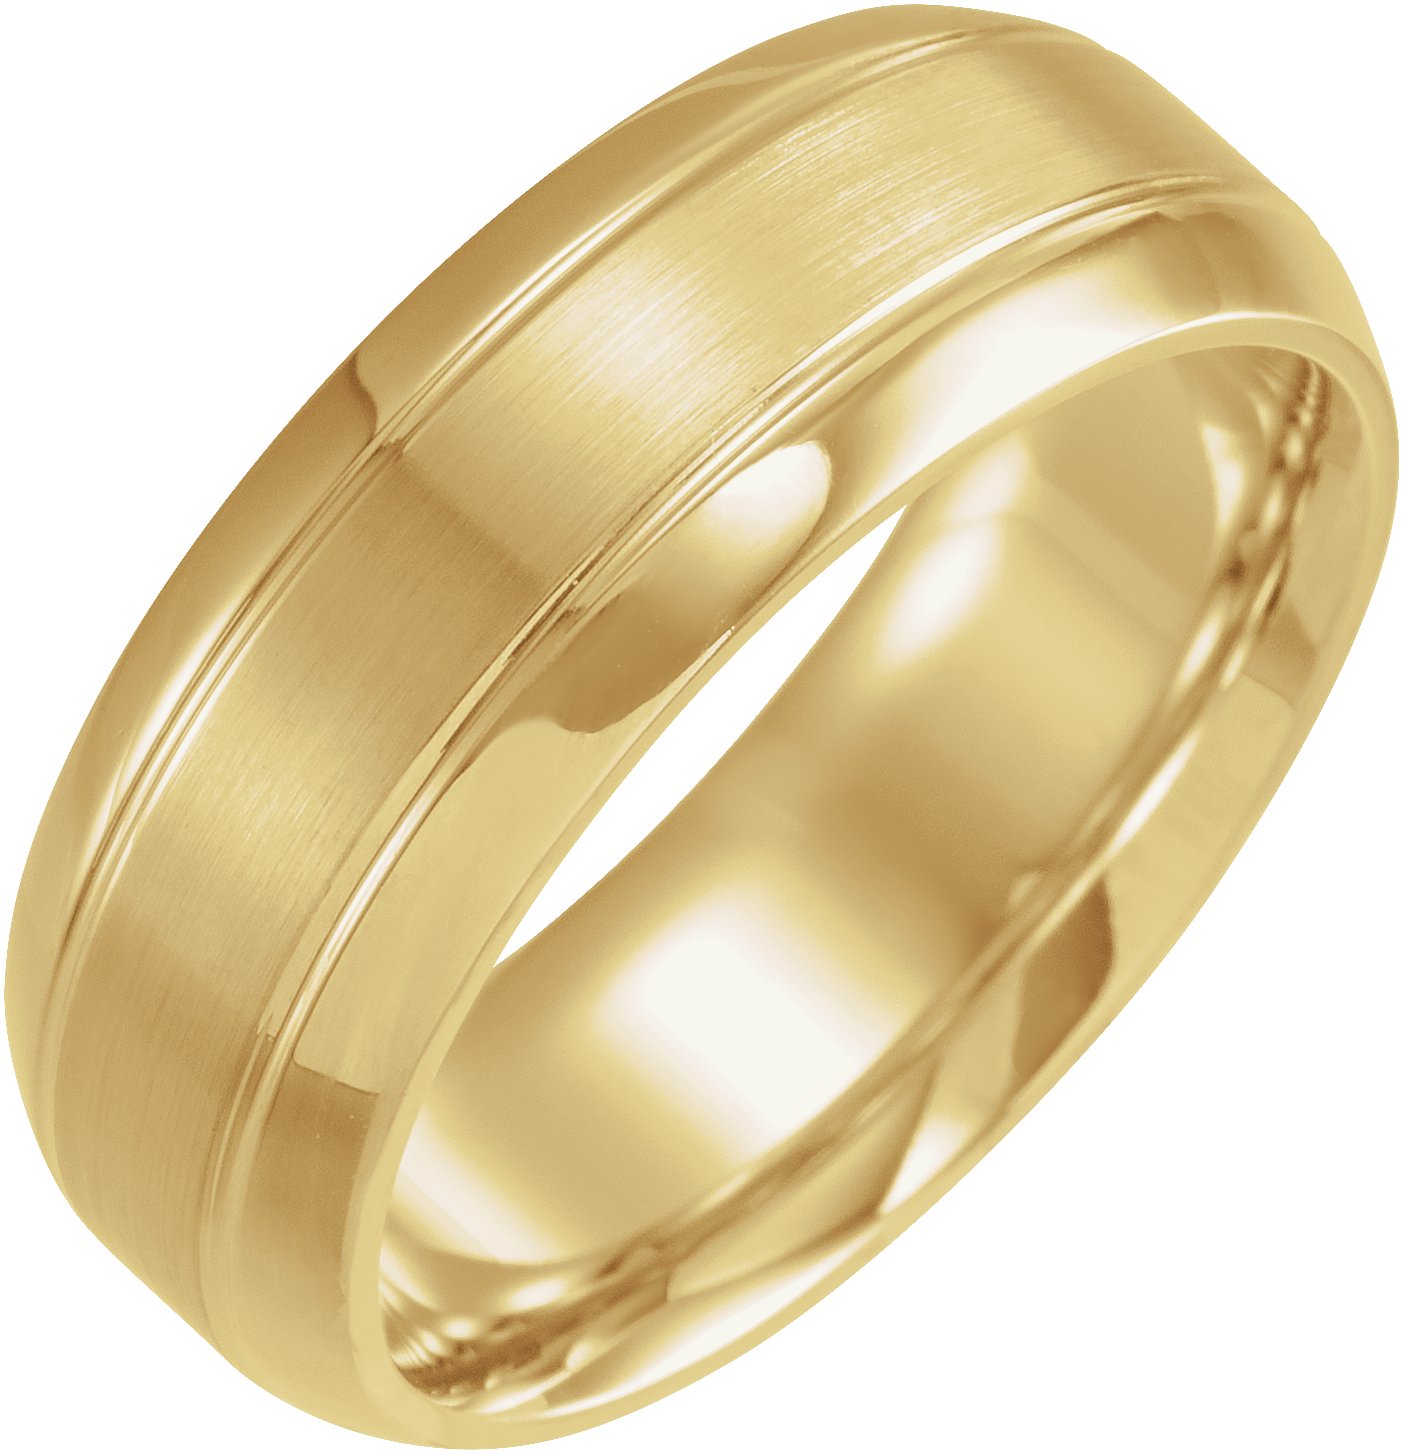 10K Yellow 6 mm Grooved Beveled Edge Band Size 8 Ref 16265028